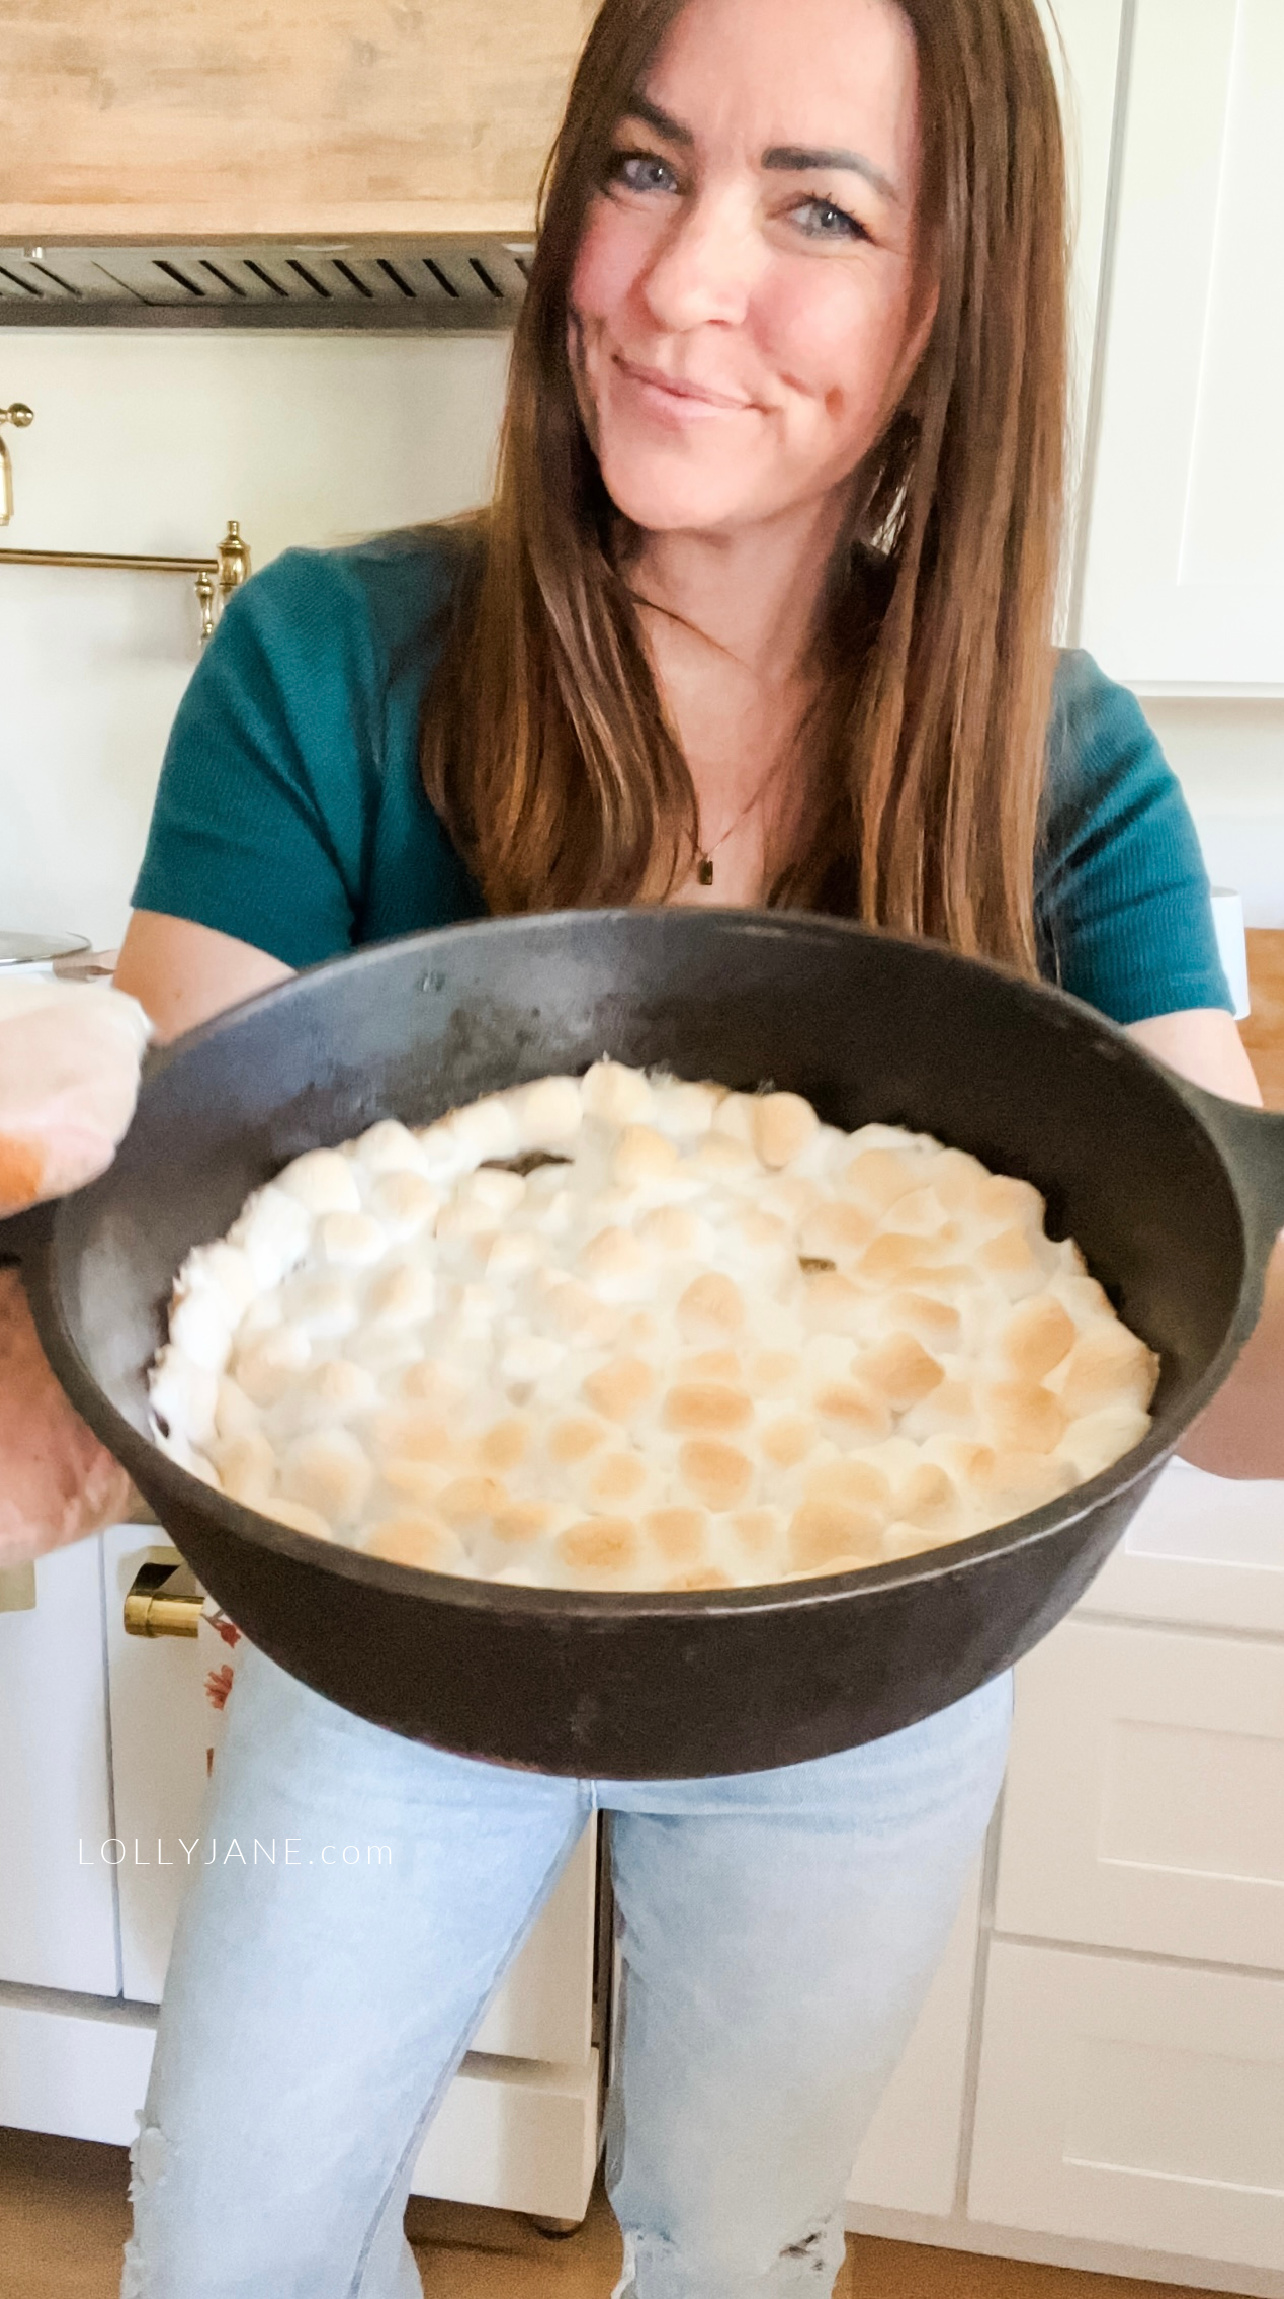 This s'mores dip, baked to toasted perfection in a cast iron skillet, is loaded with melted milk chocolate and marshmallows. Serve with graham crackers for dipping.